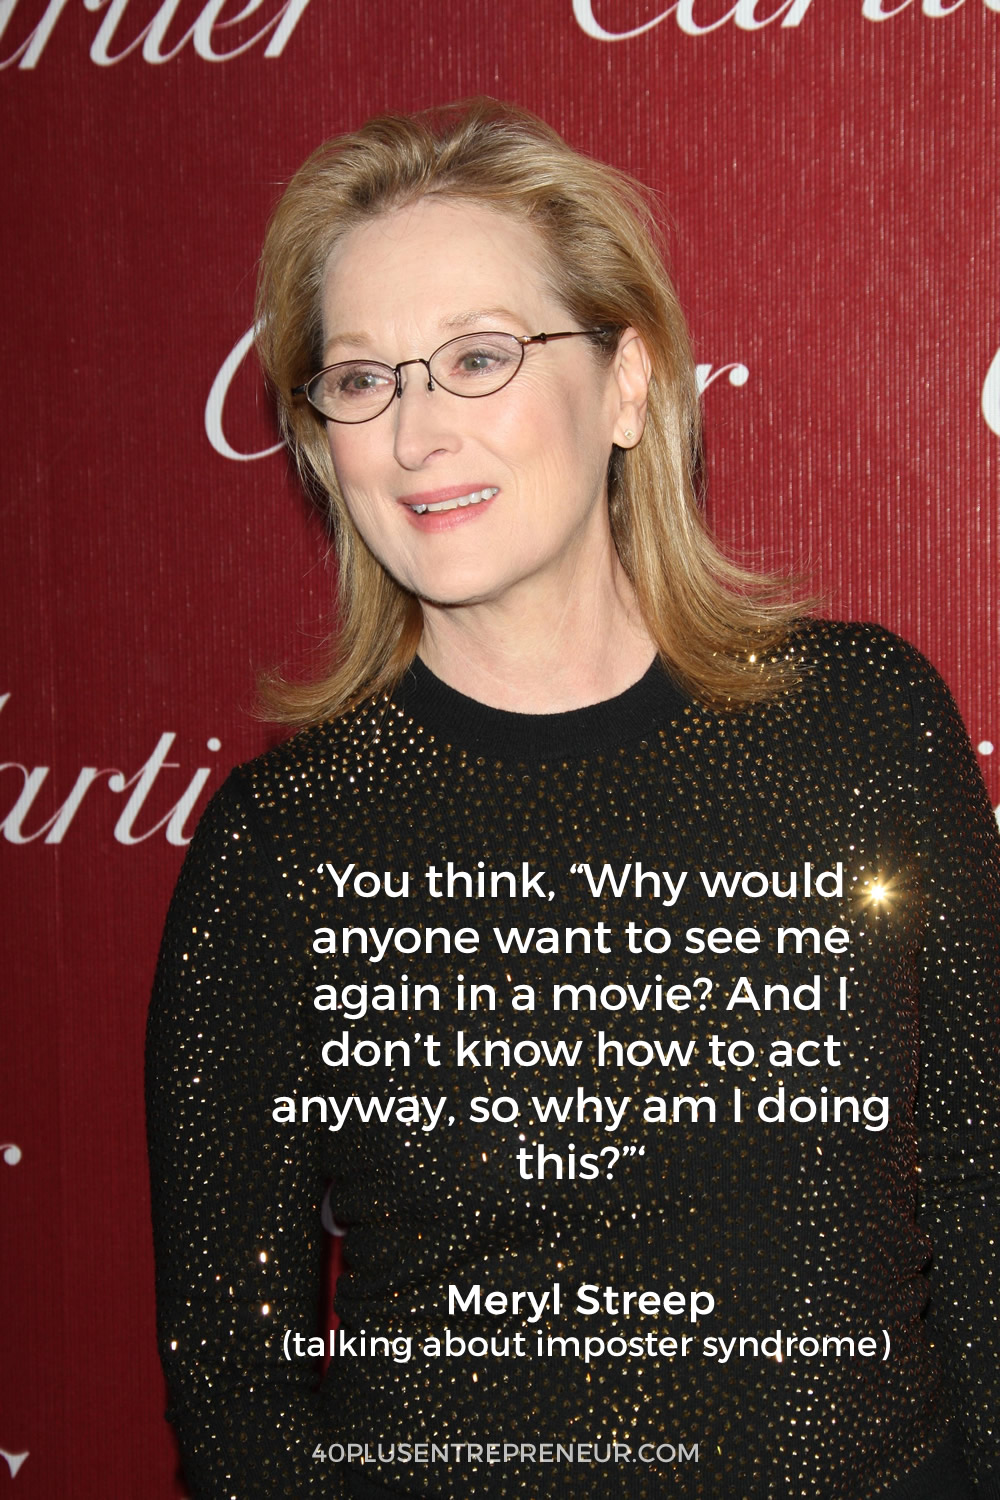 Meryl Streep talks about imposter syndrome. Find out how to overcome imposter syndrome at truepotentialacademy.com